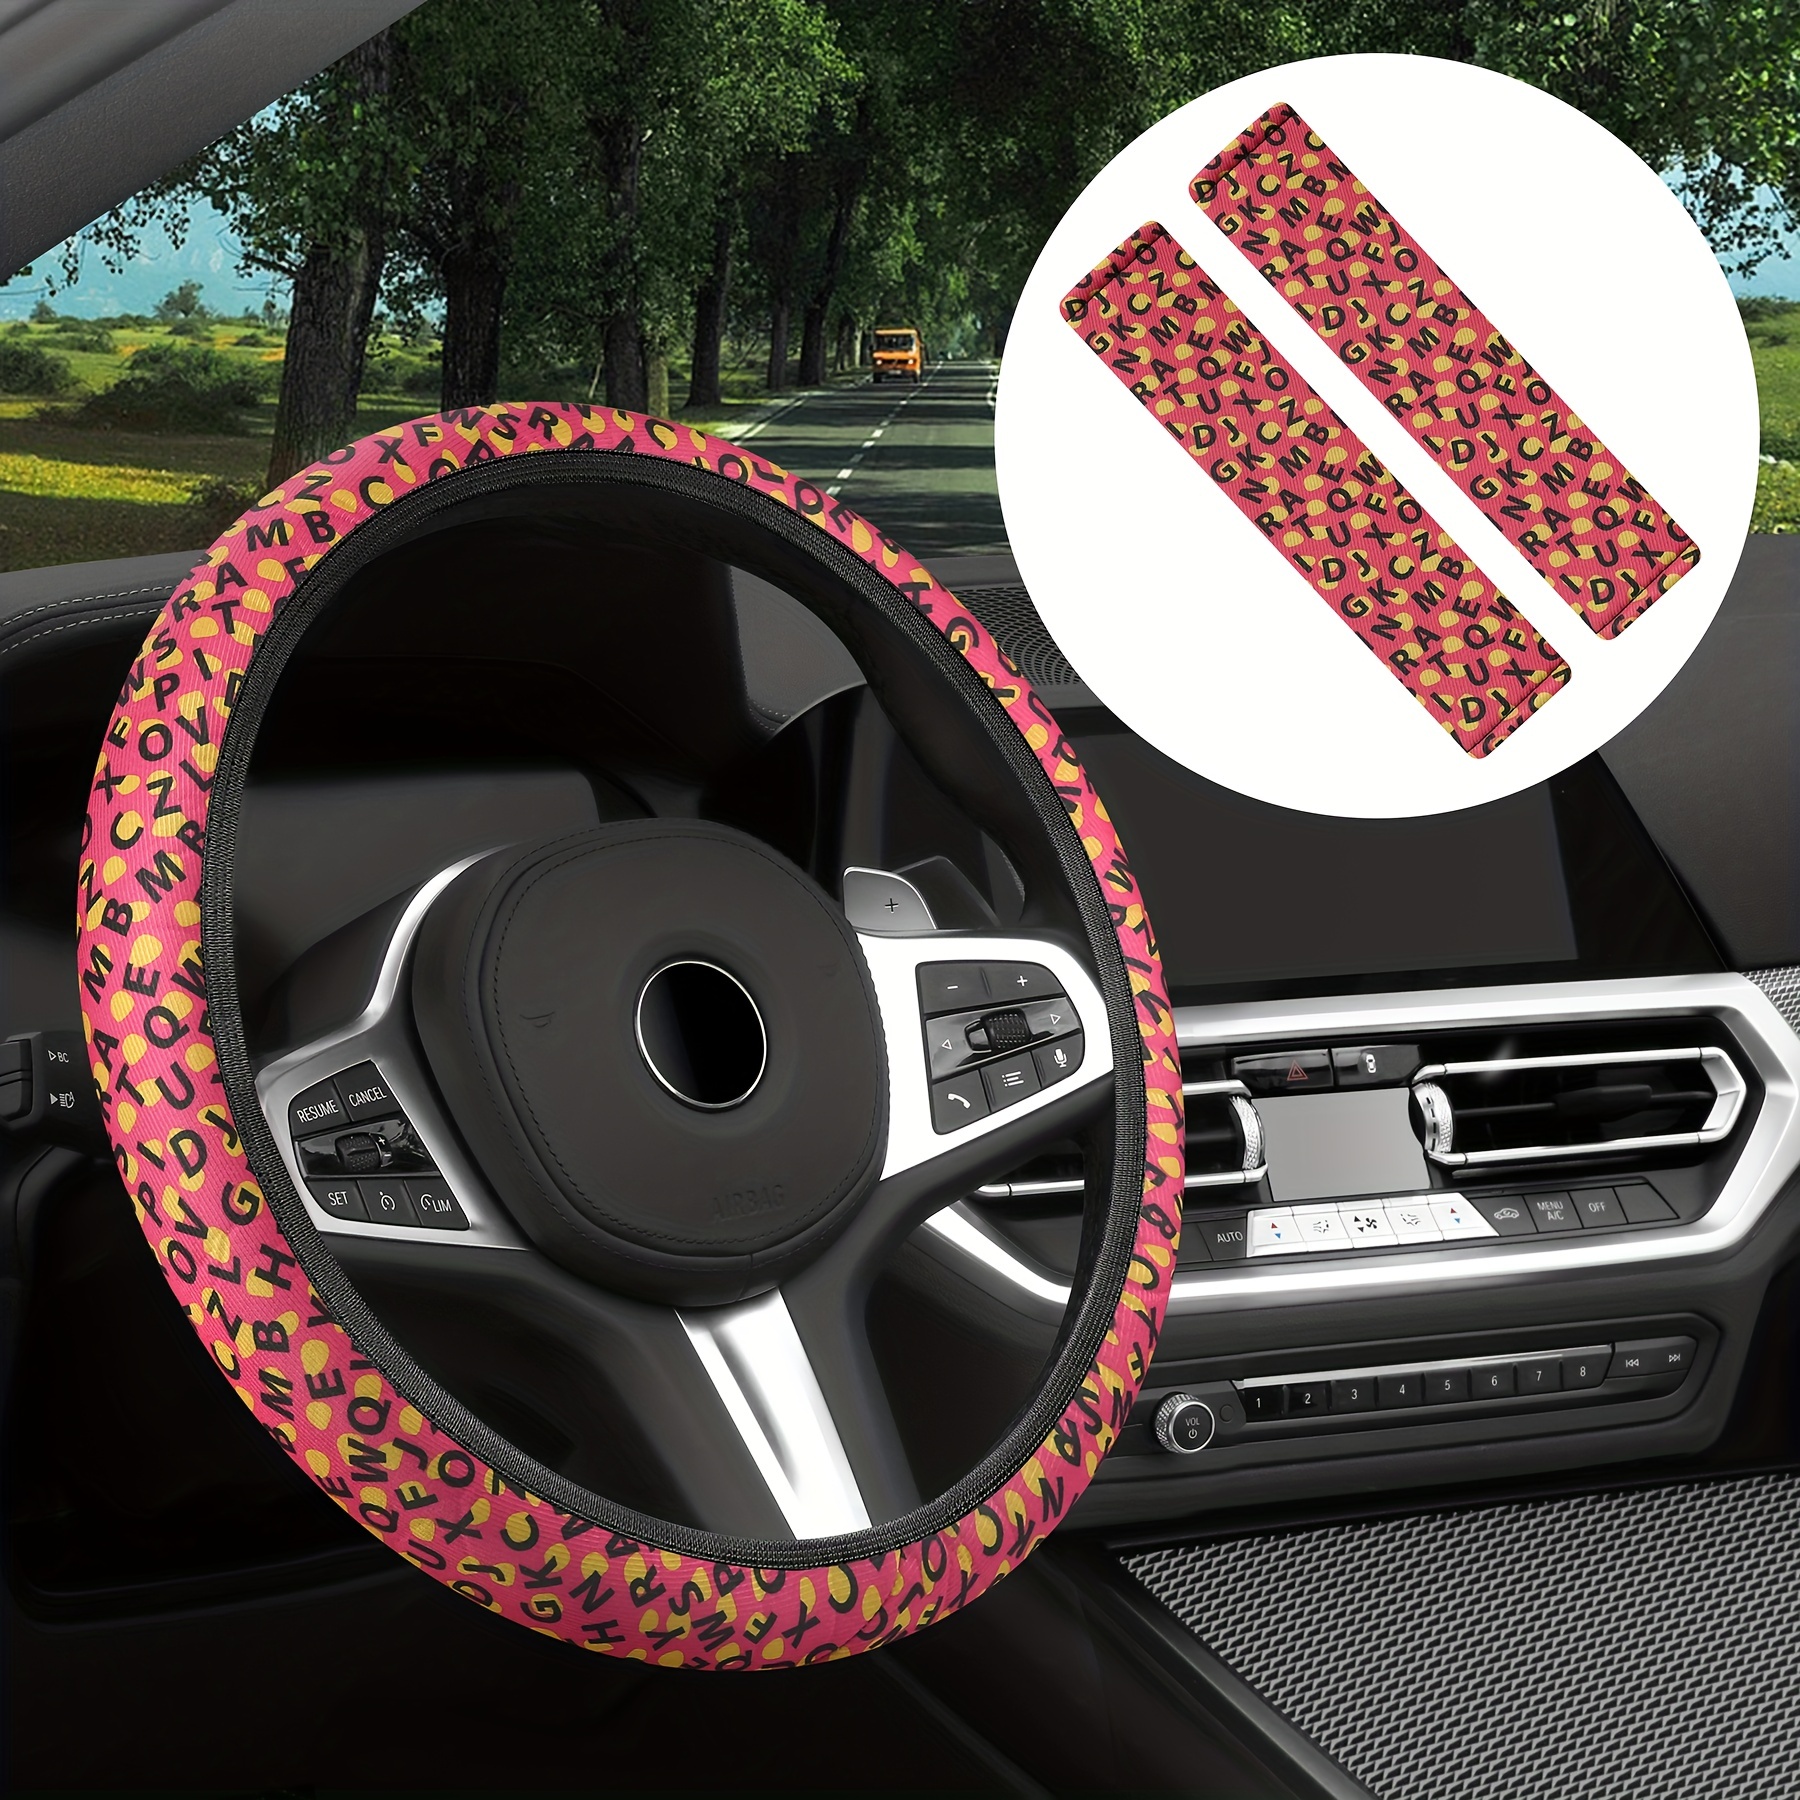 chanel steering wheel cover - Google Search